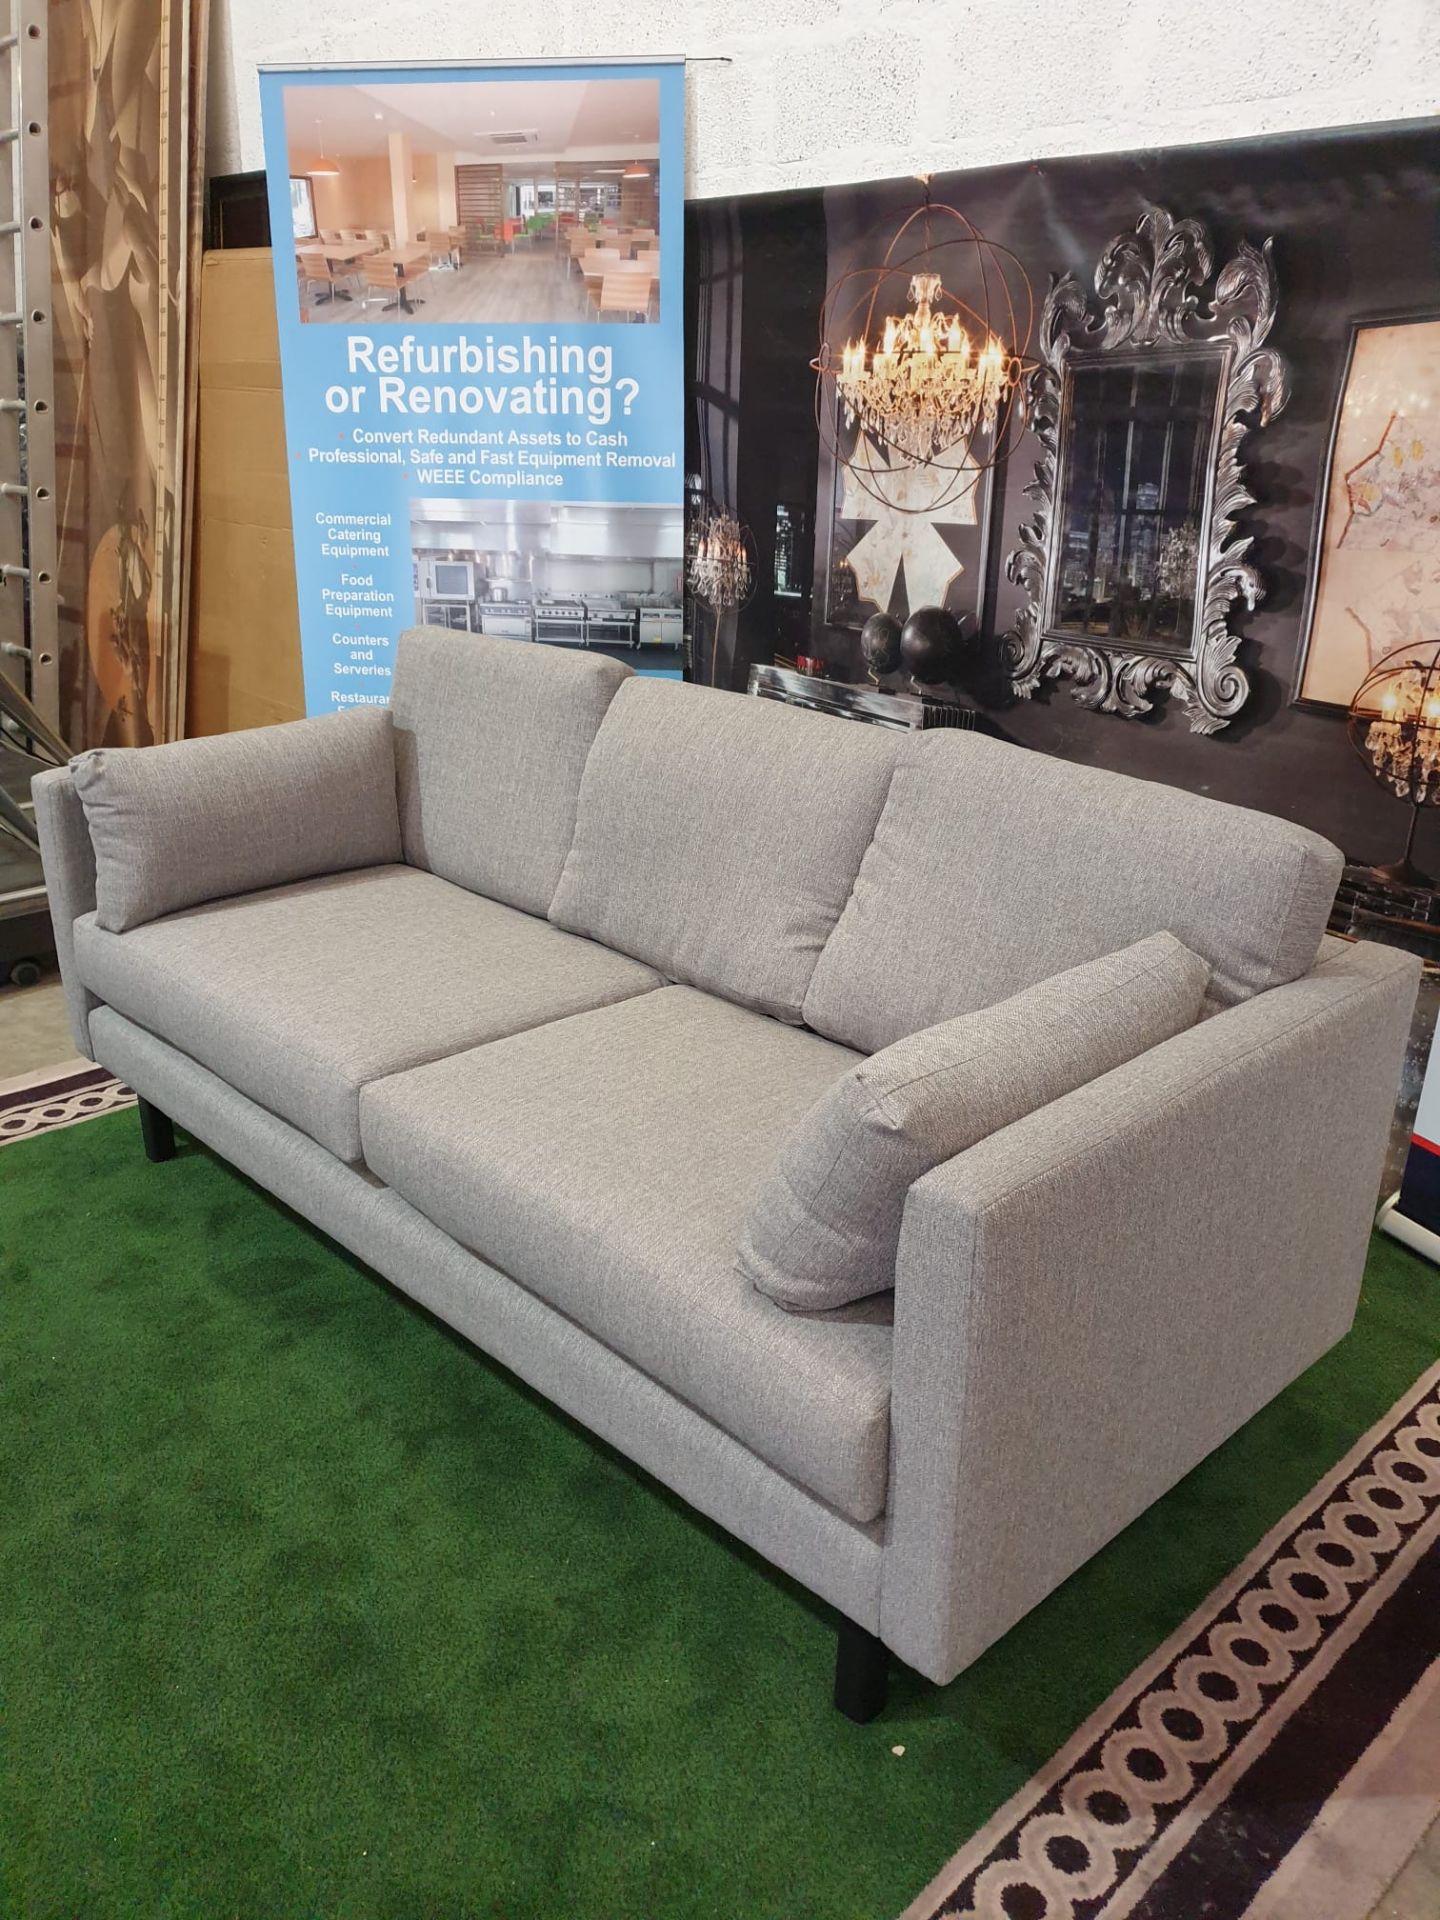 Kibre Sofa Upholstered in Berwick Meghan Stone Ultra modern sofa great for an apartment or open plan